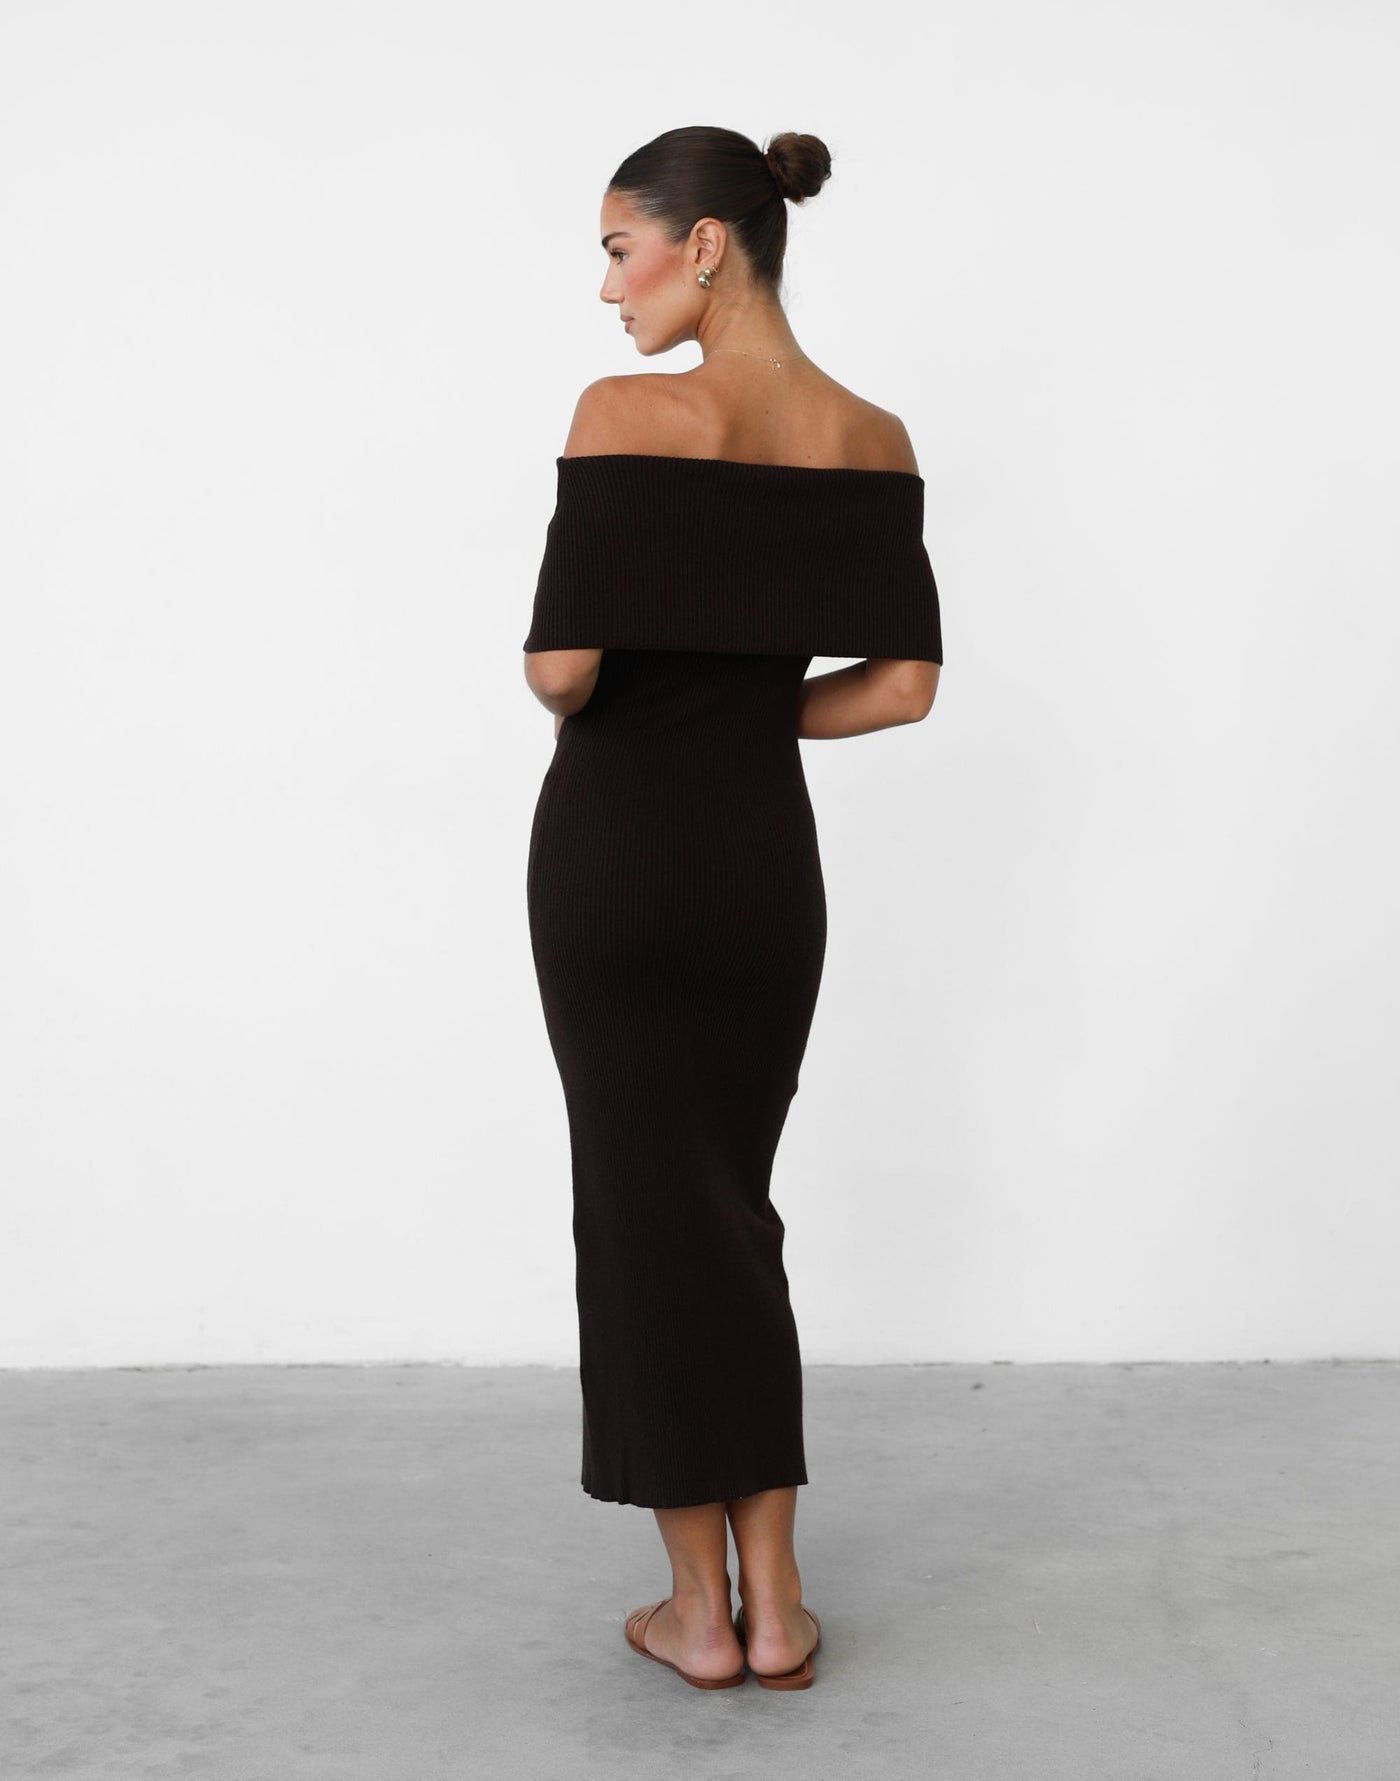 Ambiguity Maxi Dress (Chocolate) - Knit Off Shoulder Fold Over Maxi Dress - Women's Top - Charcoal Clothing